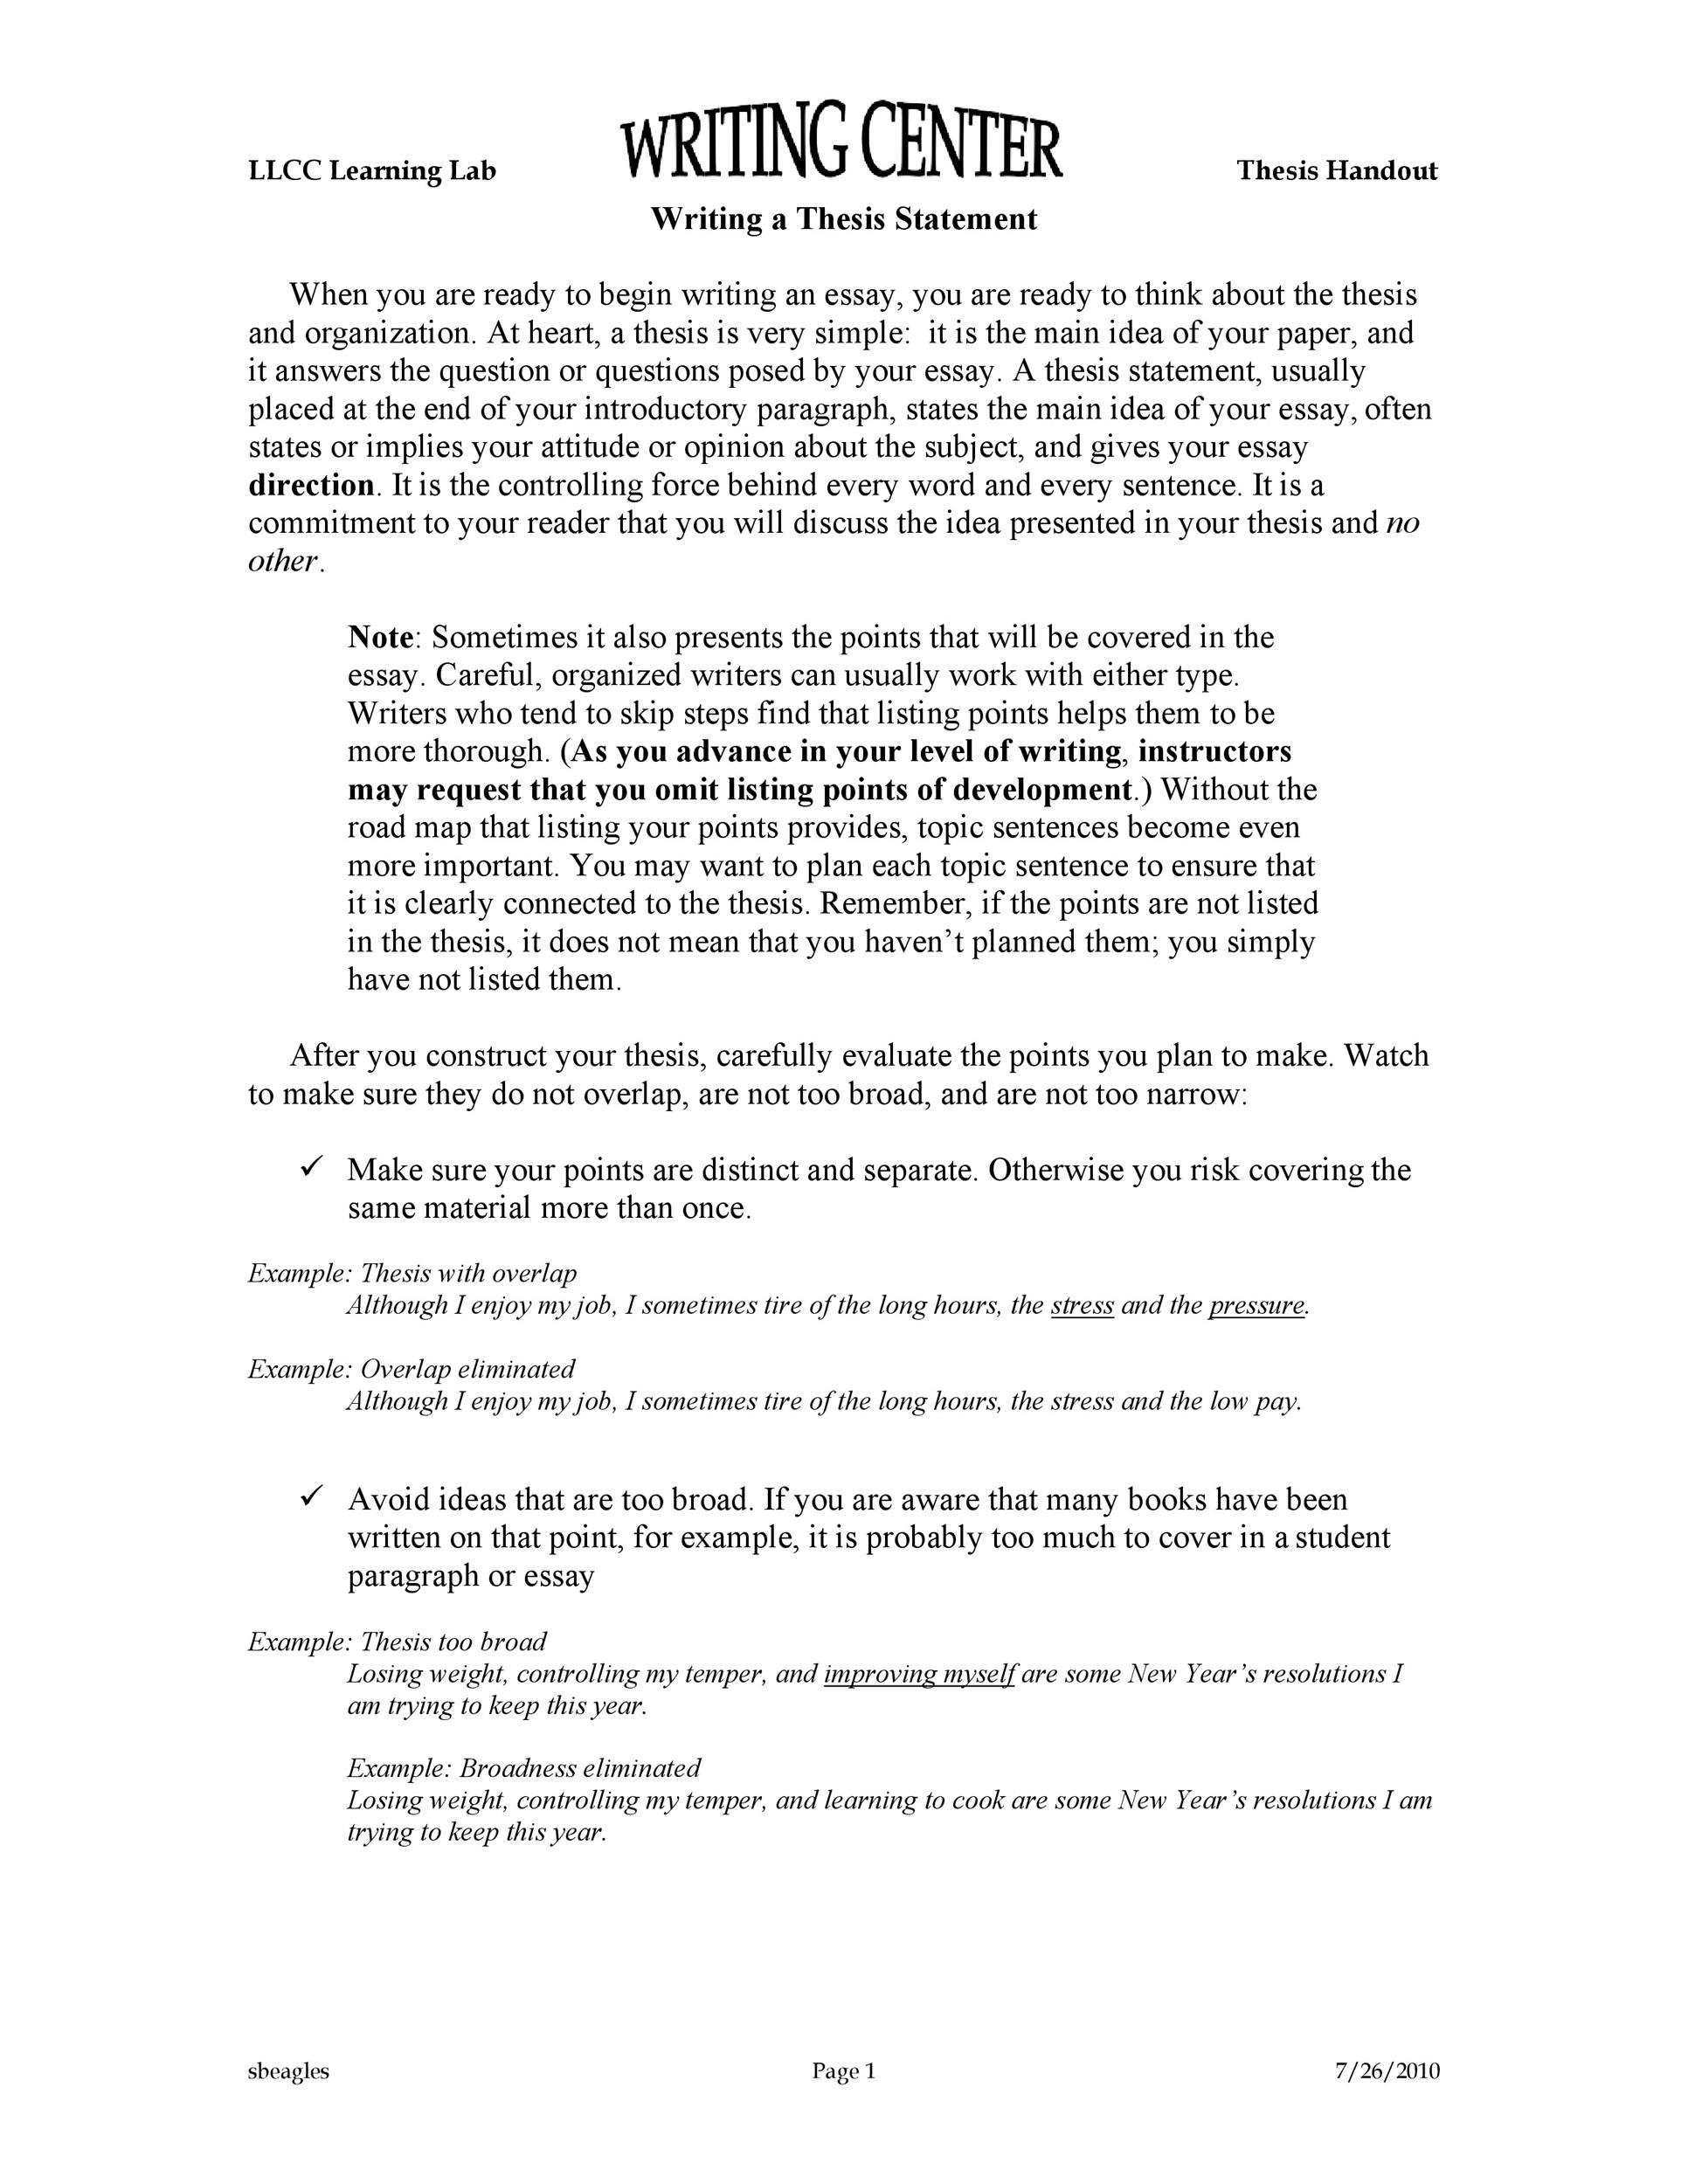 Free thesis statement template 41